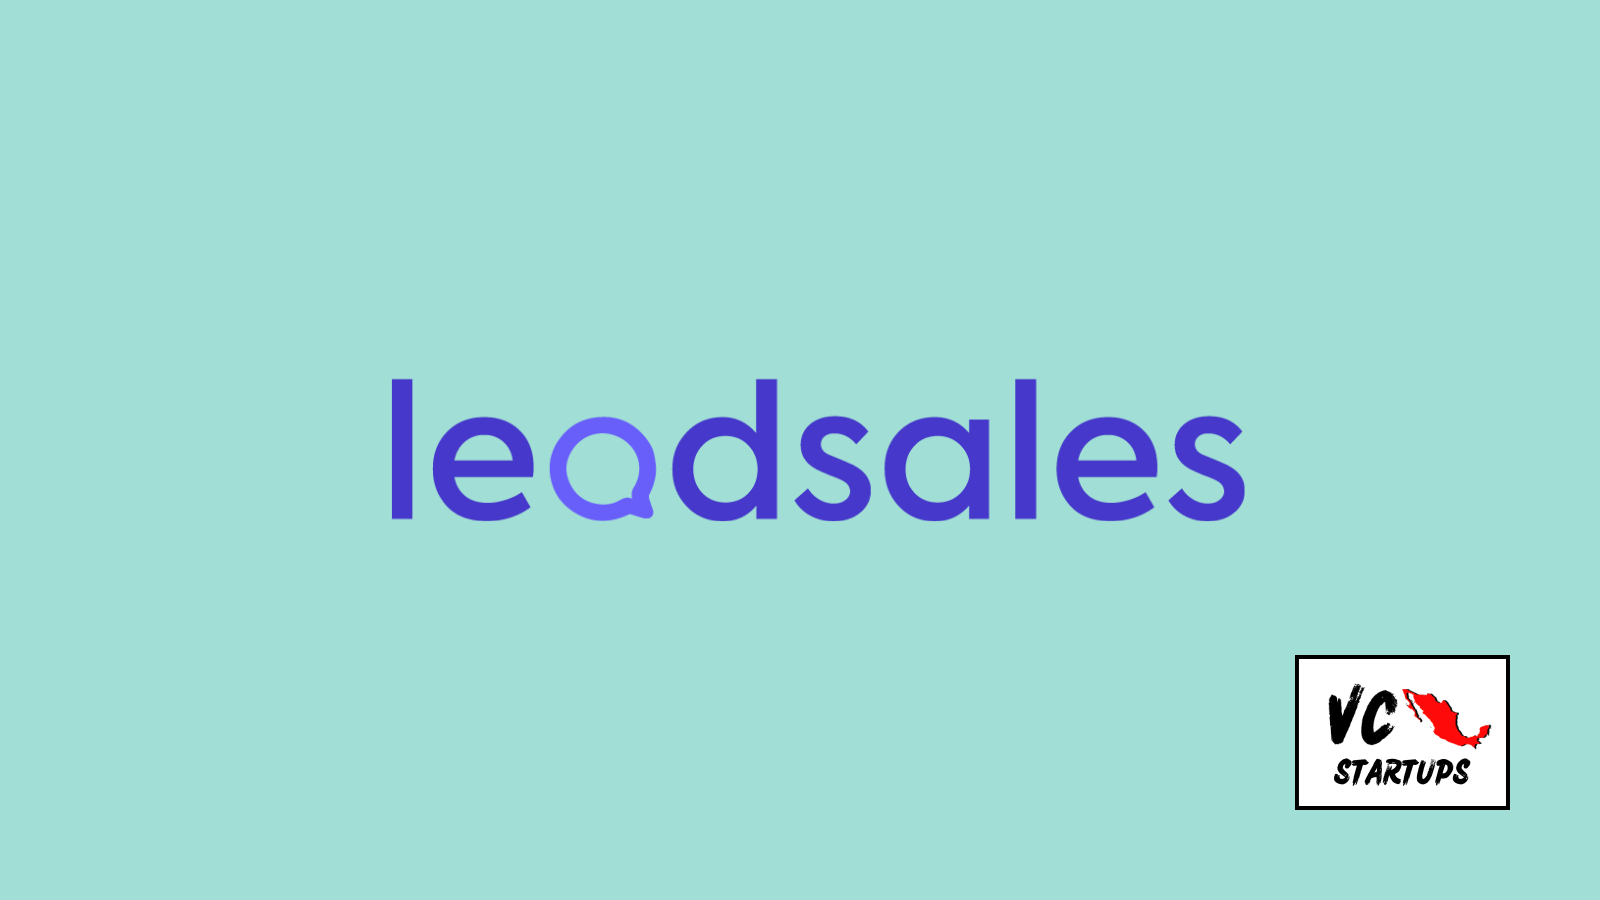 Startup Mx: Leadsales